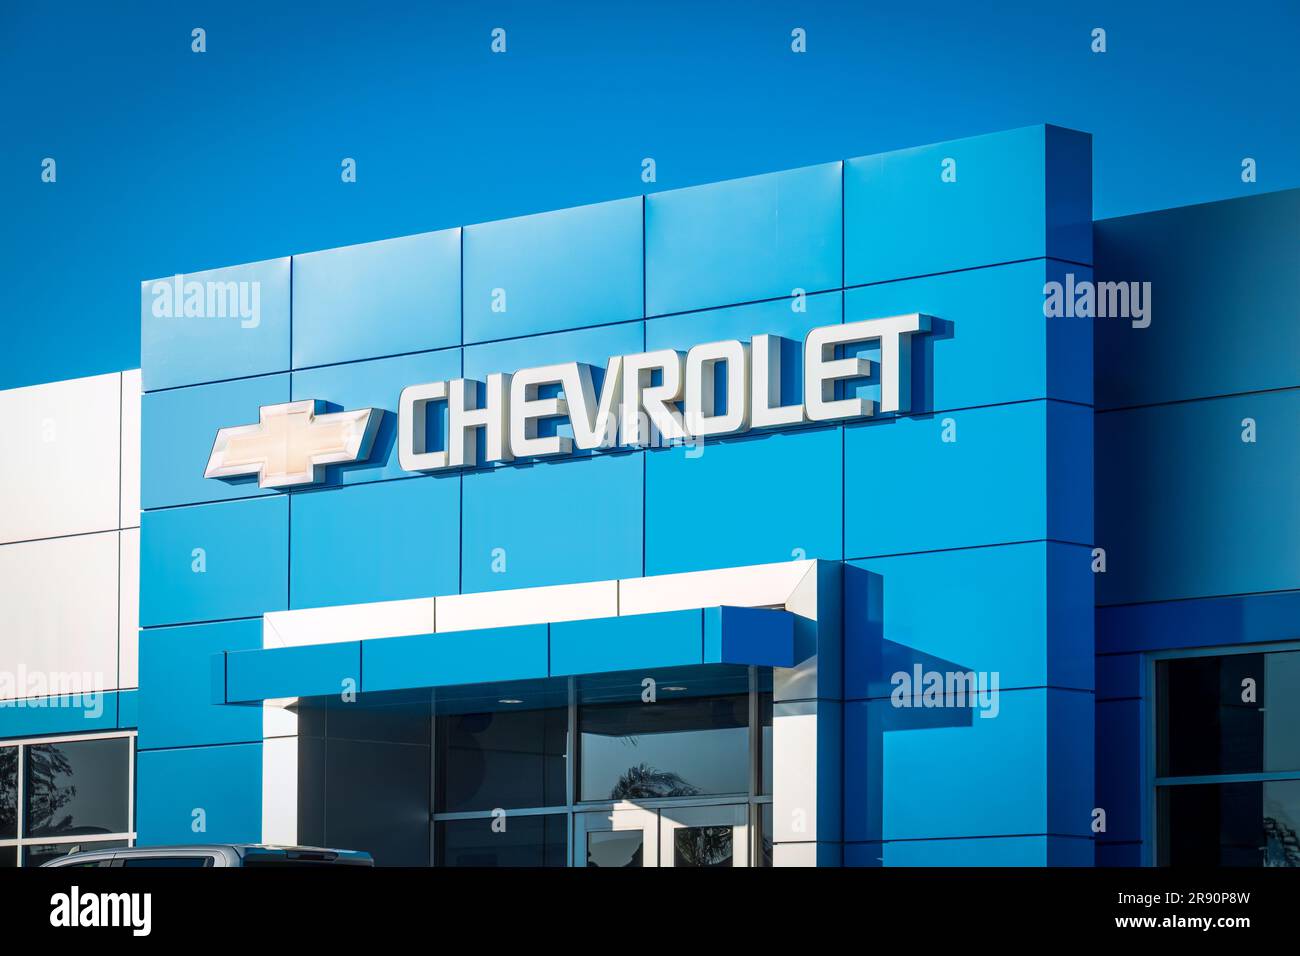 Upland, USA – November 15, 2022: The familiar bow tie logo, the Chevrolet brand name and vehicle designs that respond to driver needs promise sales an Stock Photo